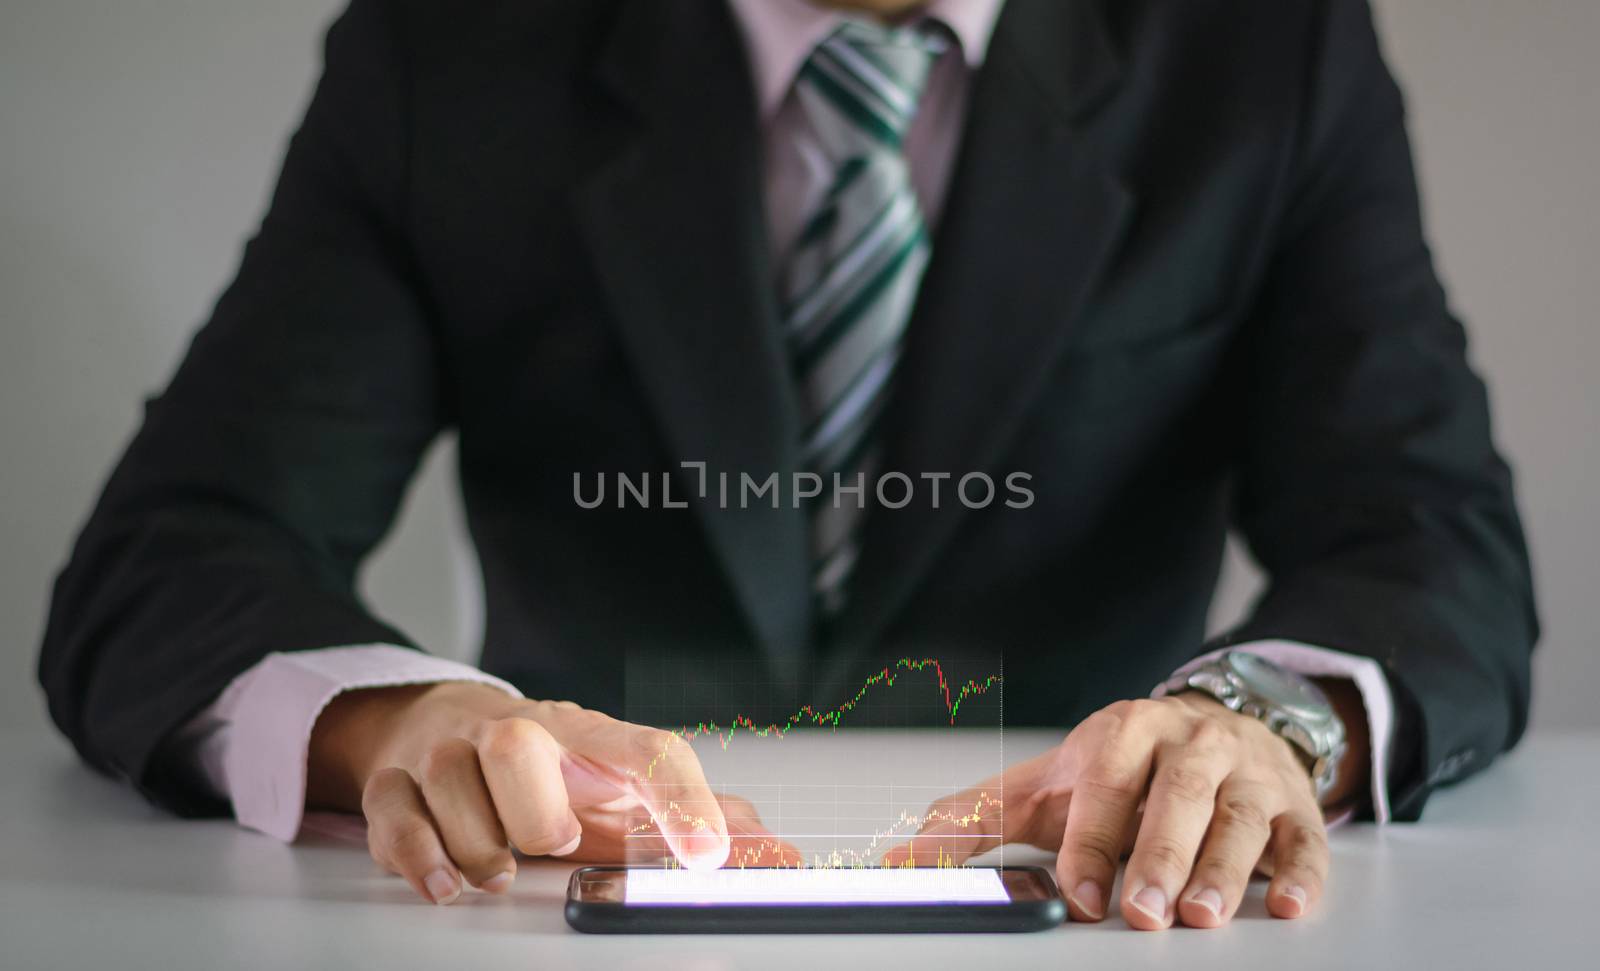 A man use checking a business graph with a hand touch screen sma by sompongtom